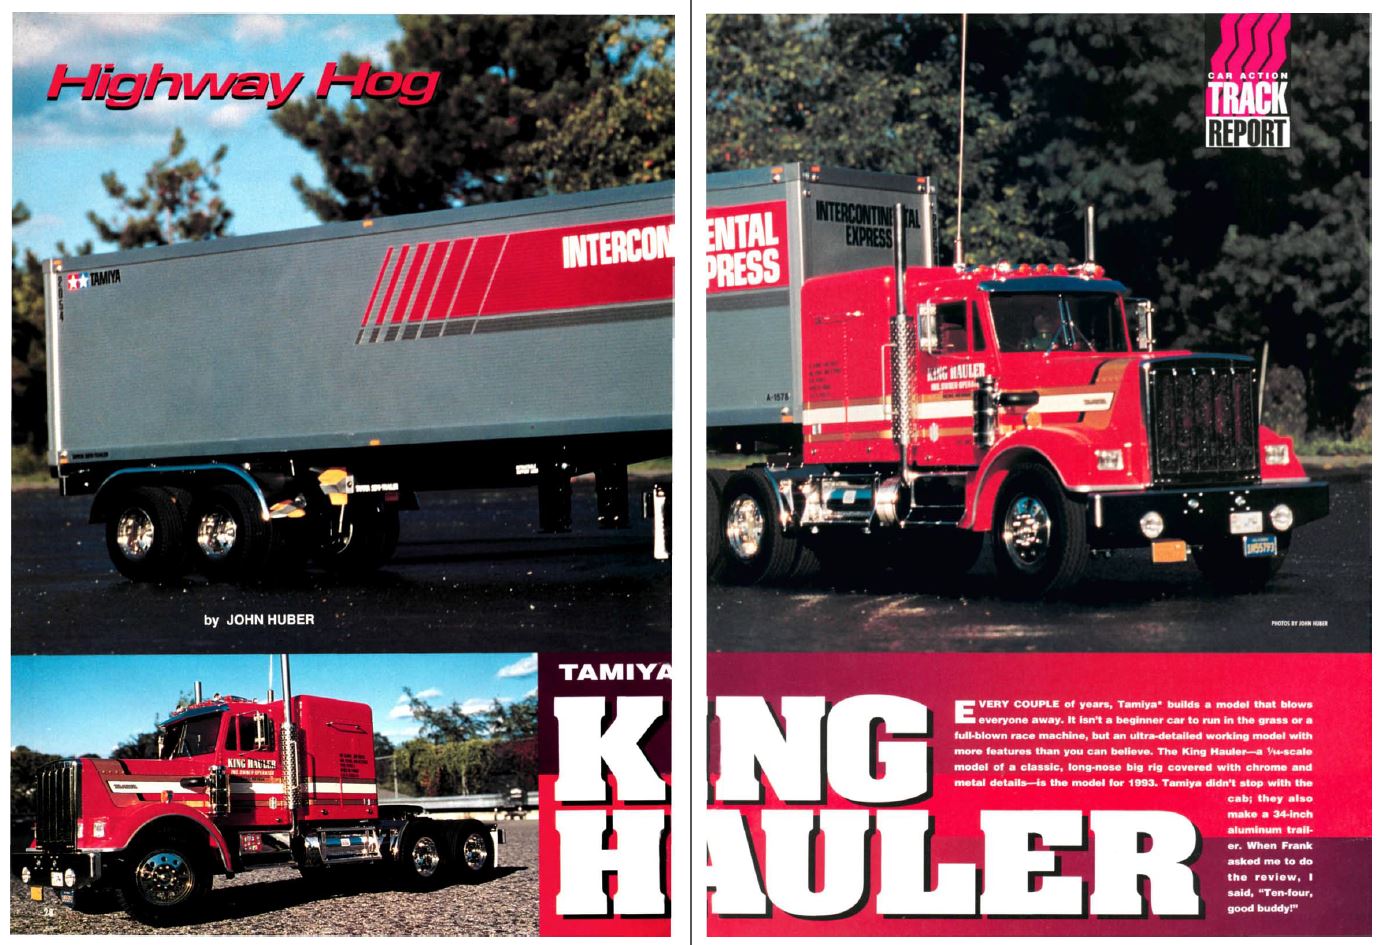 #TBT Tamiya King Hauler is Reviewed in the January 1994 Issue